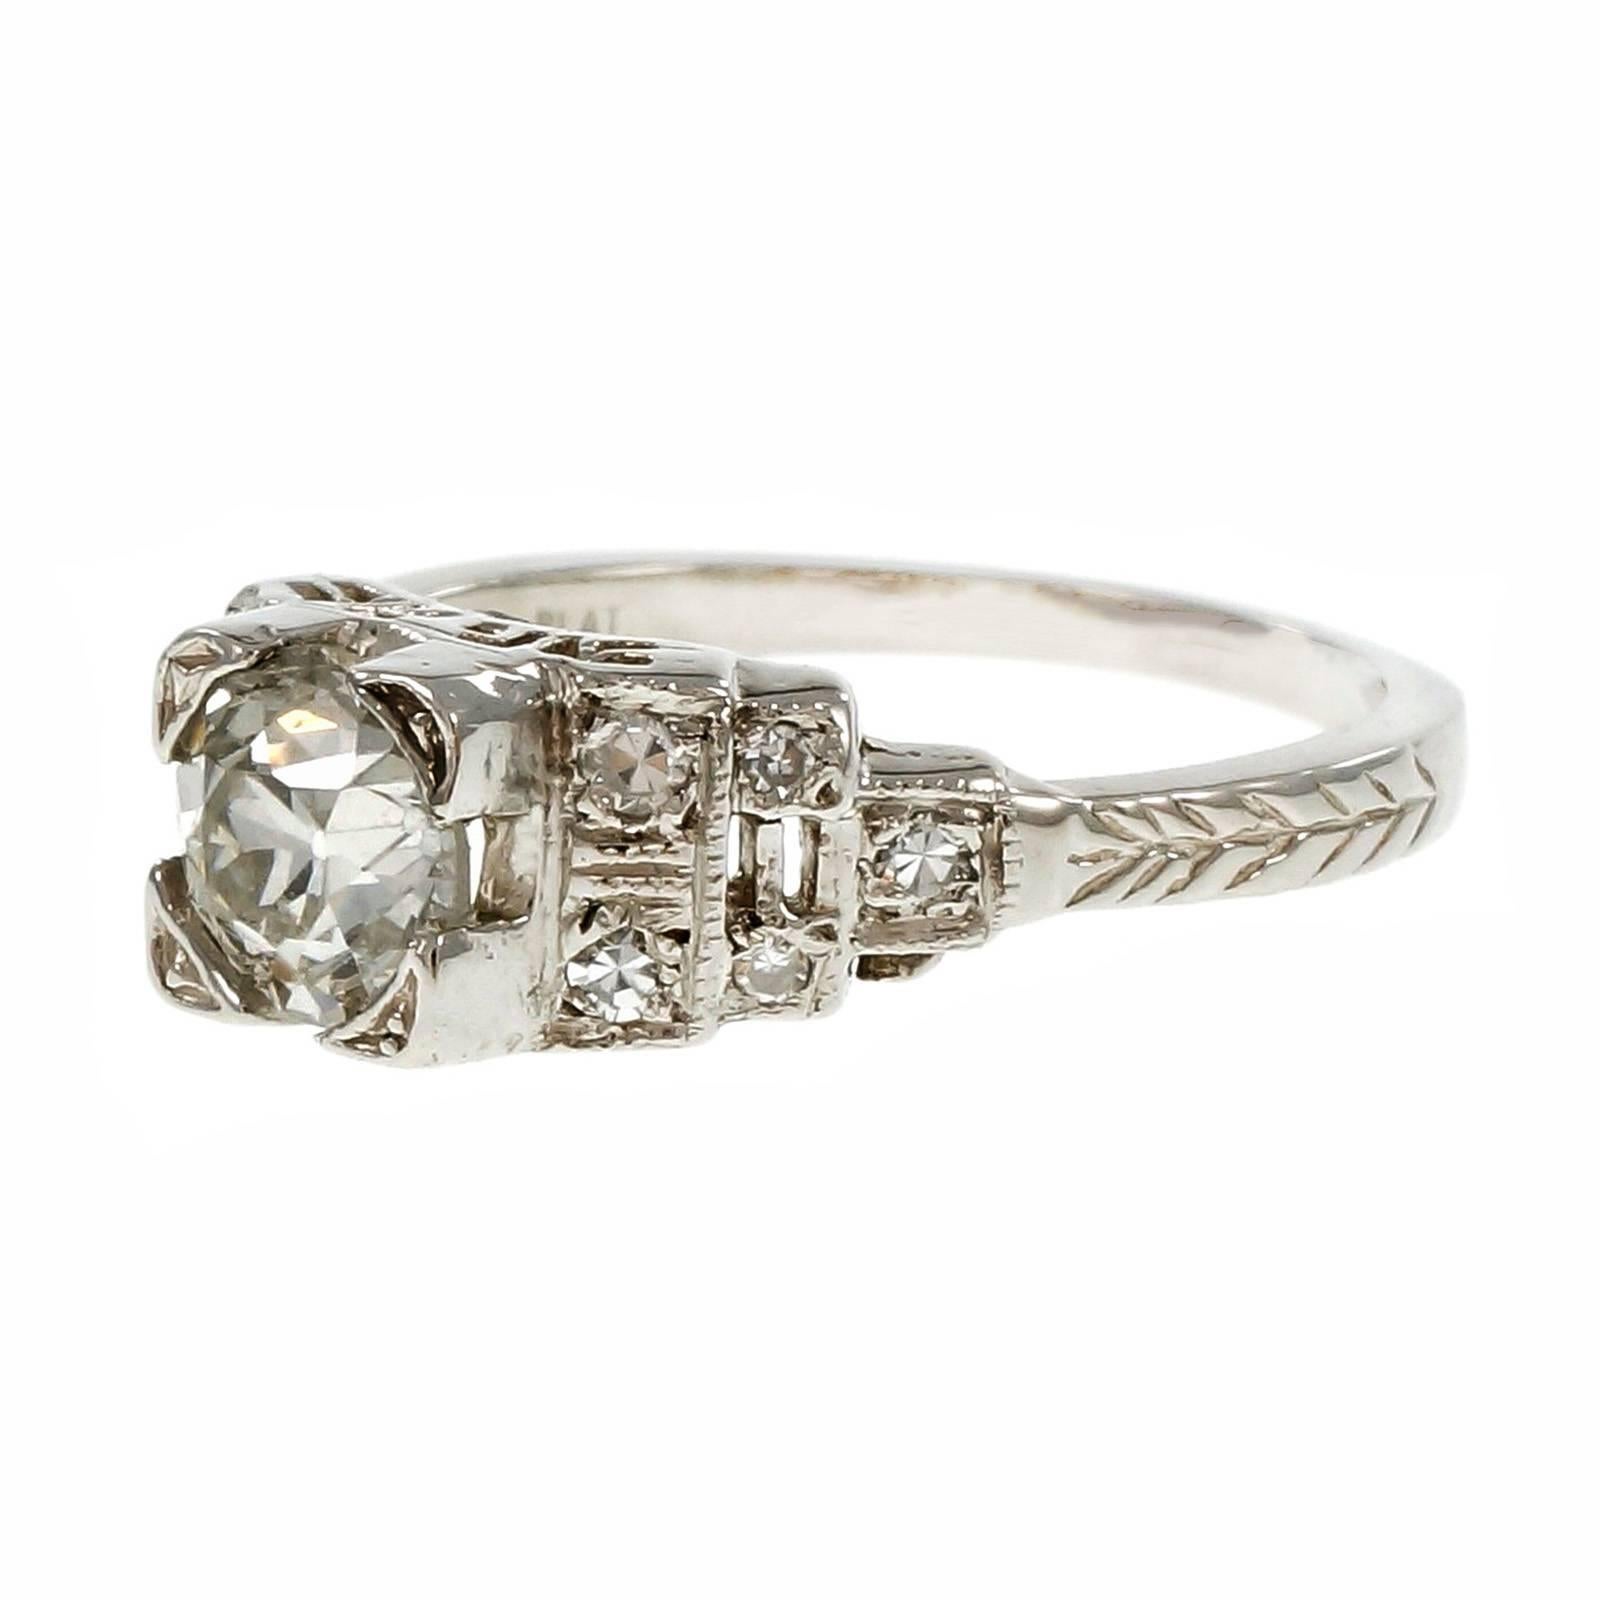 Art Deco 1930-1939 Diamond Platinum engagement ring with step design shoulders engraving and filigree work. Original old European cut bright sparkly diamonds. 

1 old European cut diamond, approx. total weight .88cts, G – H, SI3, 
10 round diamonds,